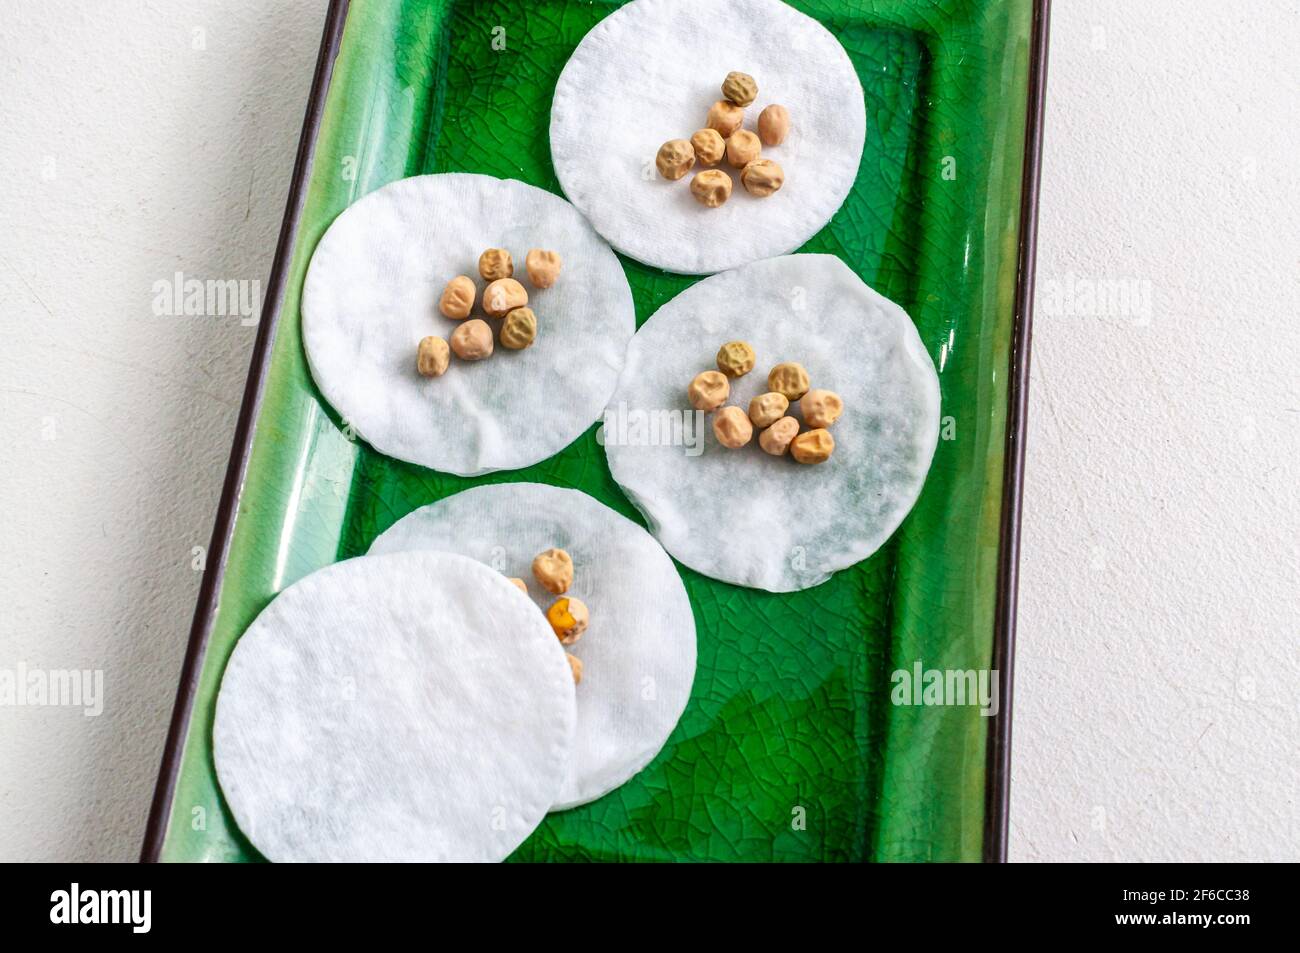 Pre-soaking the seeds before planting to germinate seeds for home gardening and growing plants at home. Seeds in a moist environment on the windowsill Stock Photo